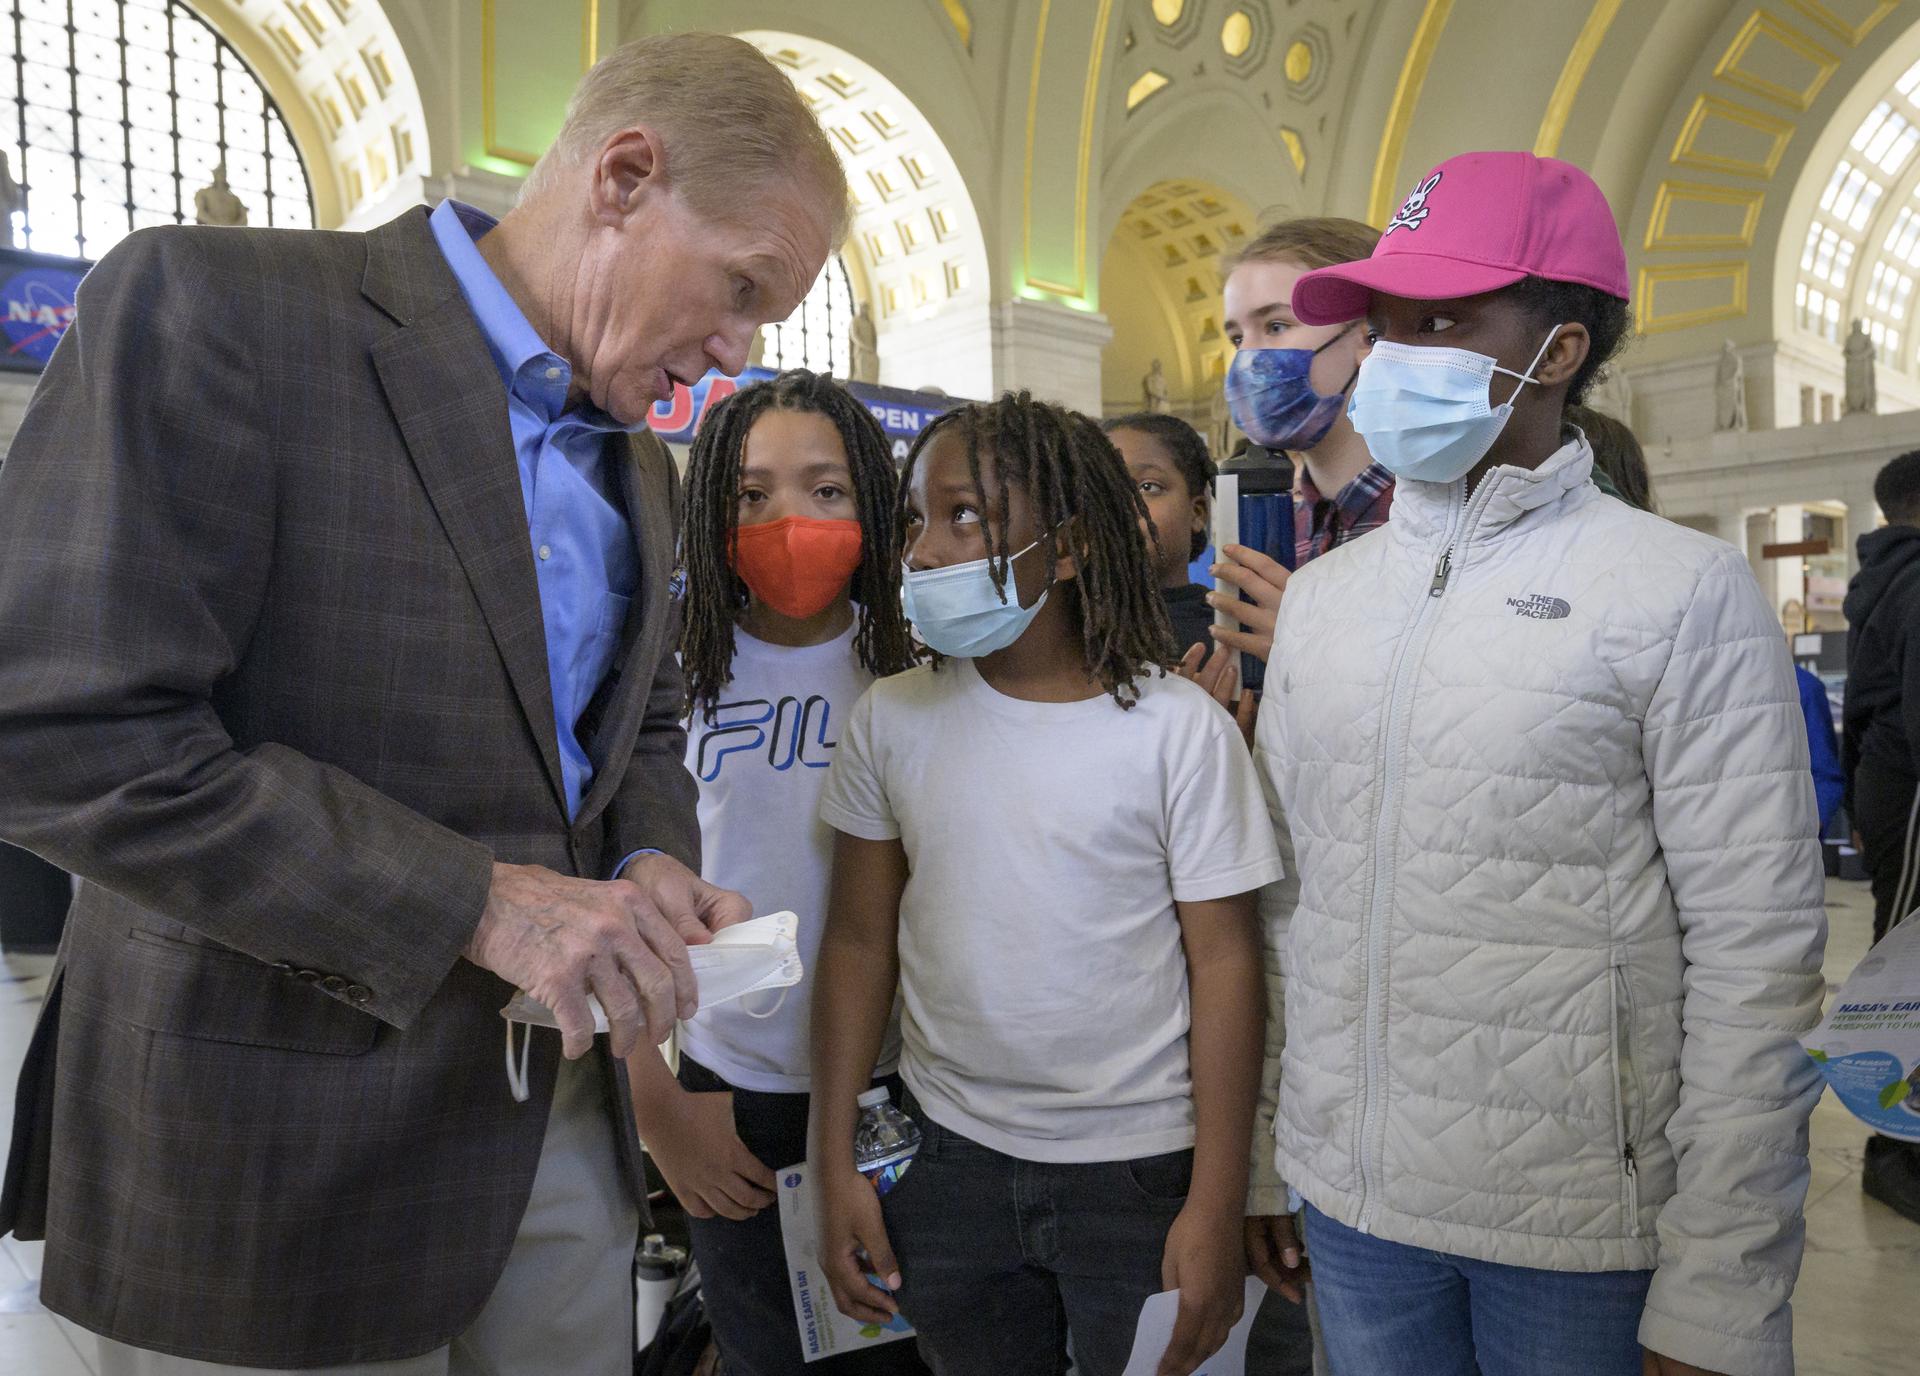 NASA Administrator Bill Nelson, left, talks with Washington area school children about Earth Day during his visit of NASA hands-on exhibits inside Union Station in Washington, Friday, April 22, 2022.